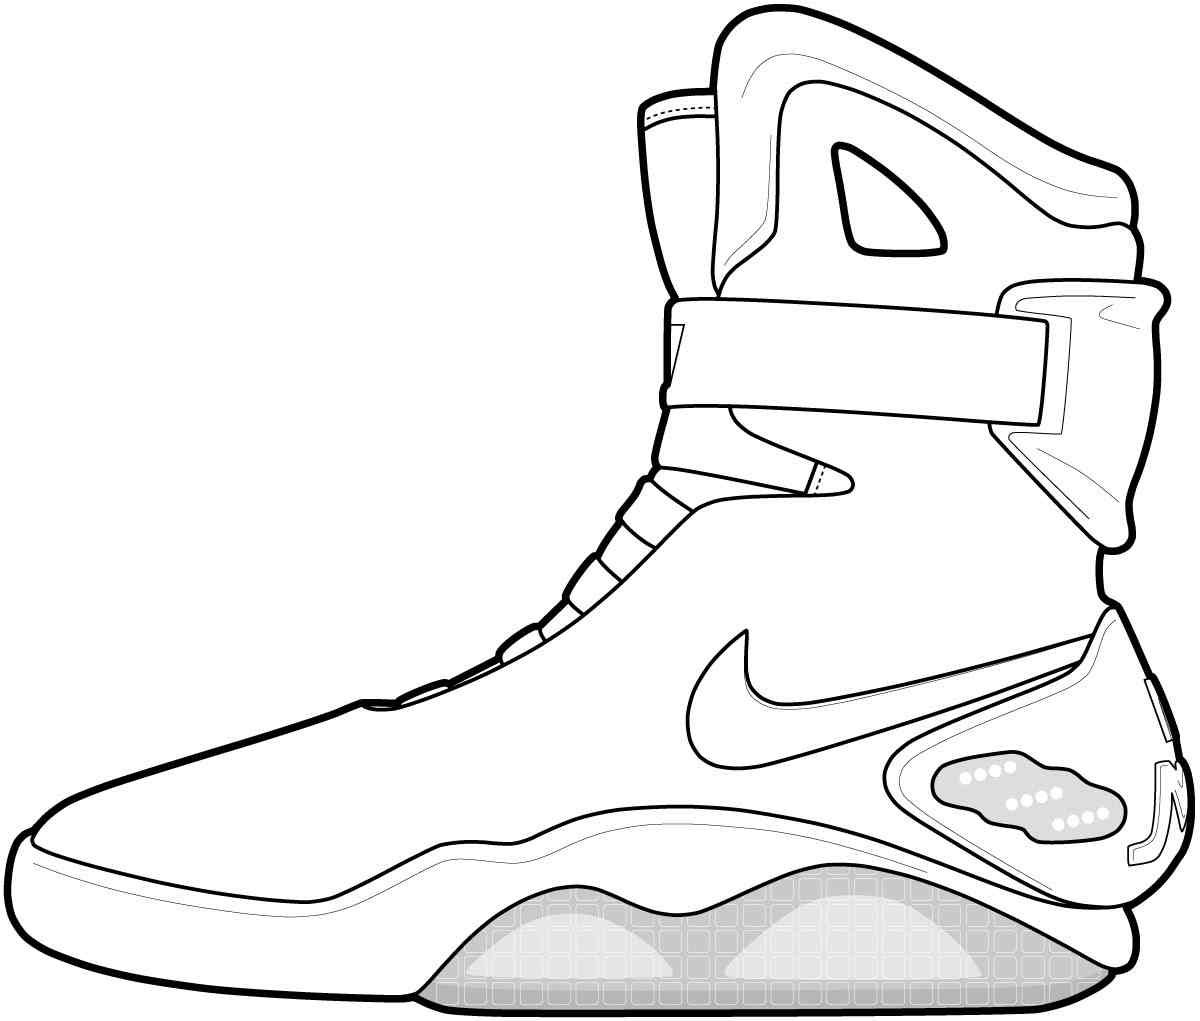 Coloring Pages Of Nike Shoes | ?oloring Pages For All Ages